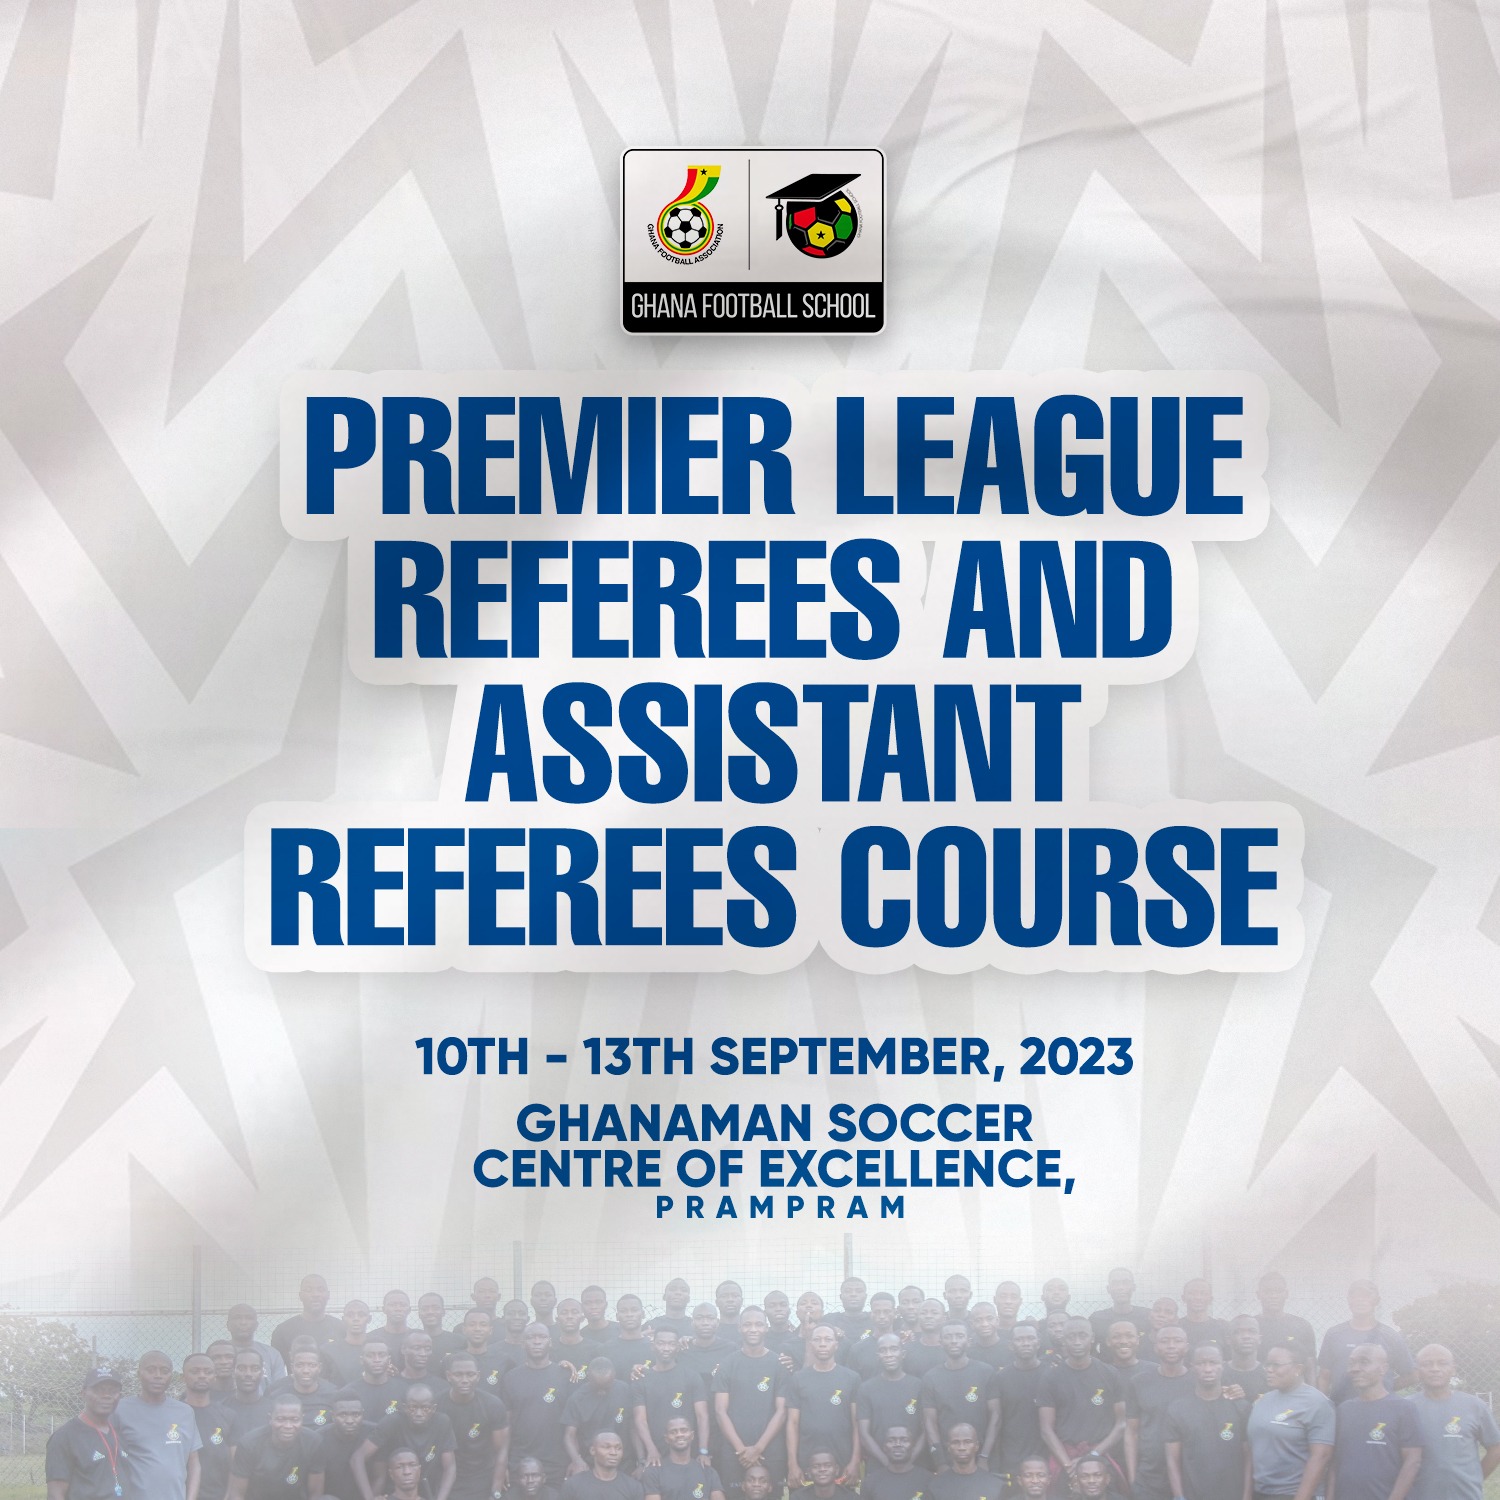 Premier League Referees and Assistant Referees to train for 2023/24 season